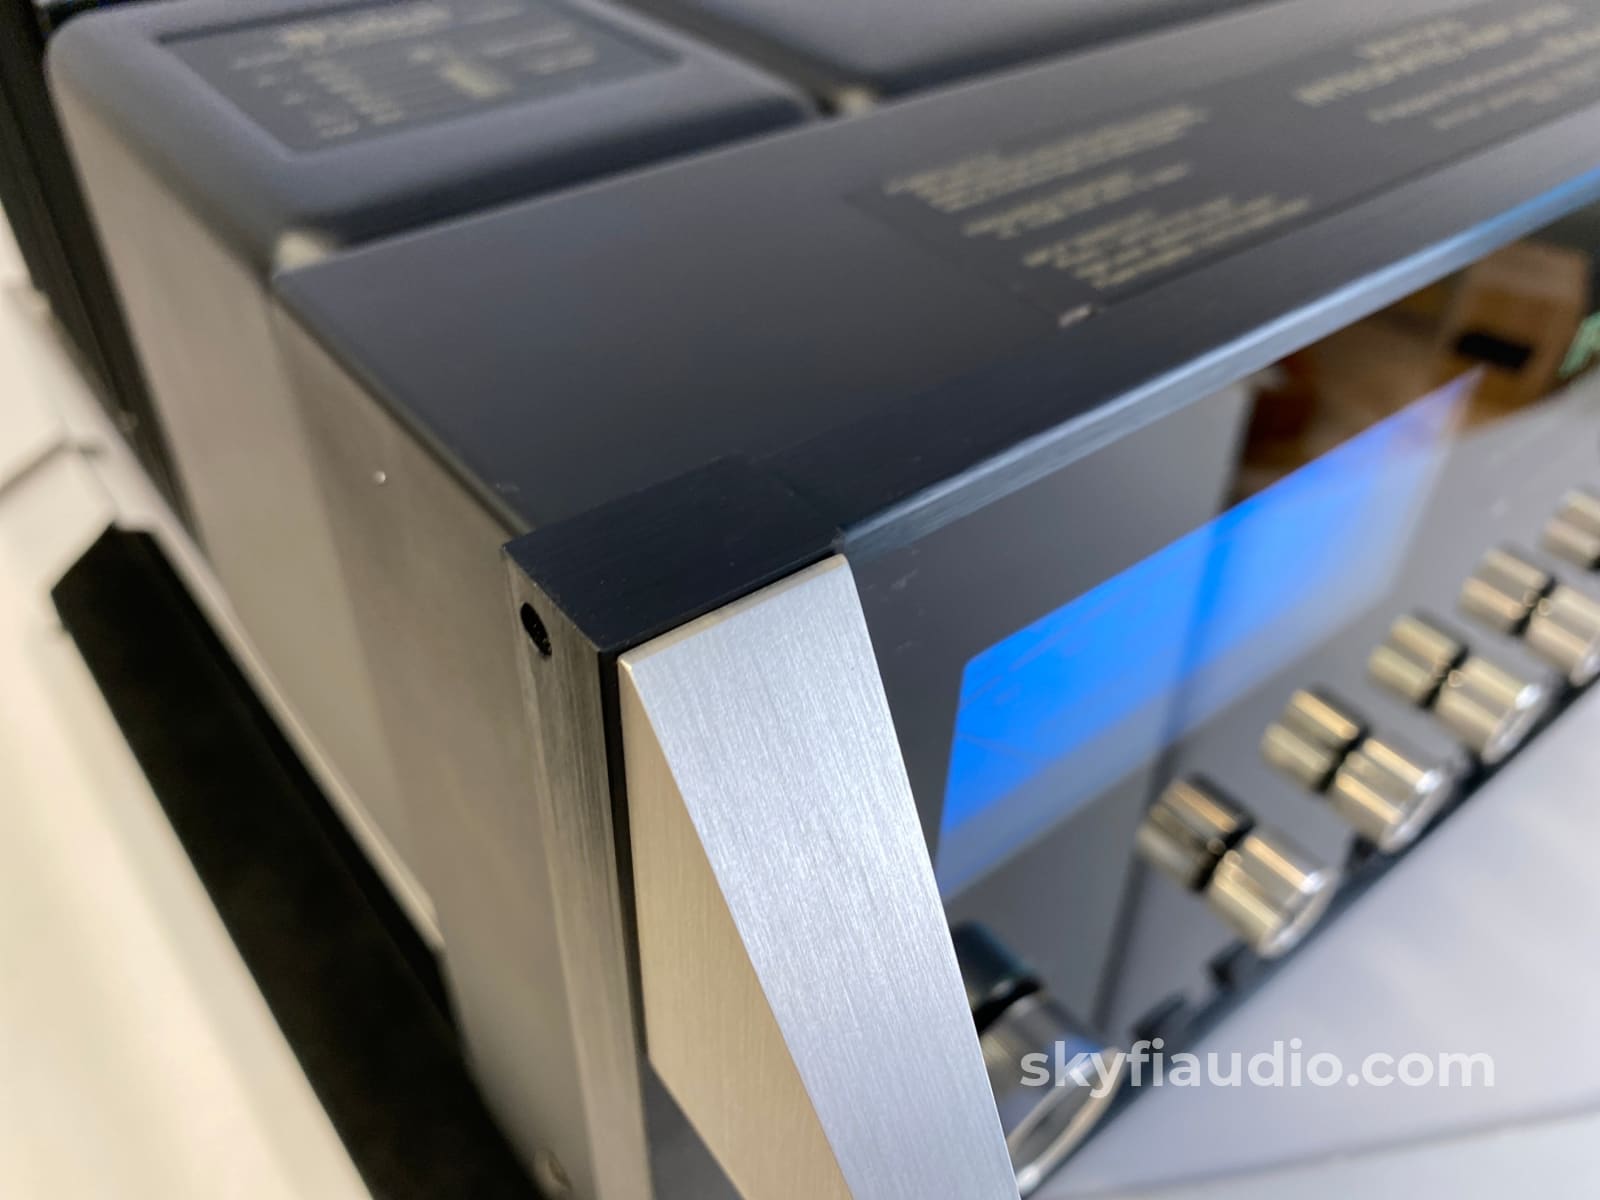 Mcintosh Ma7000 Integrated Amplifier - Big Power And Eq!